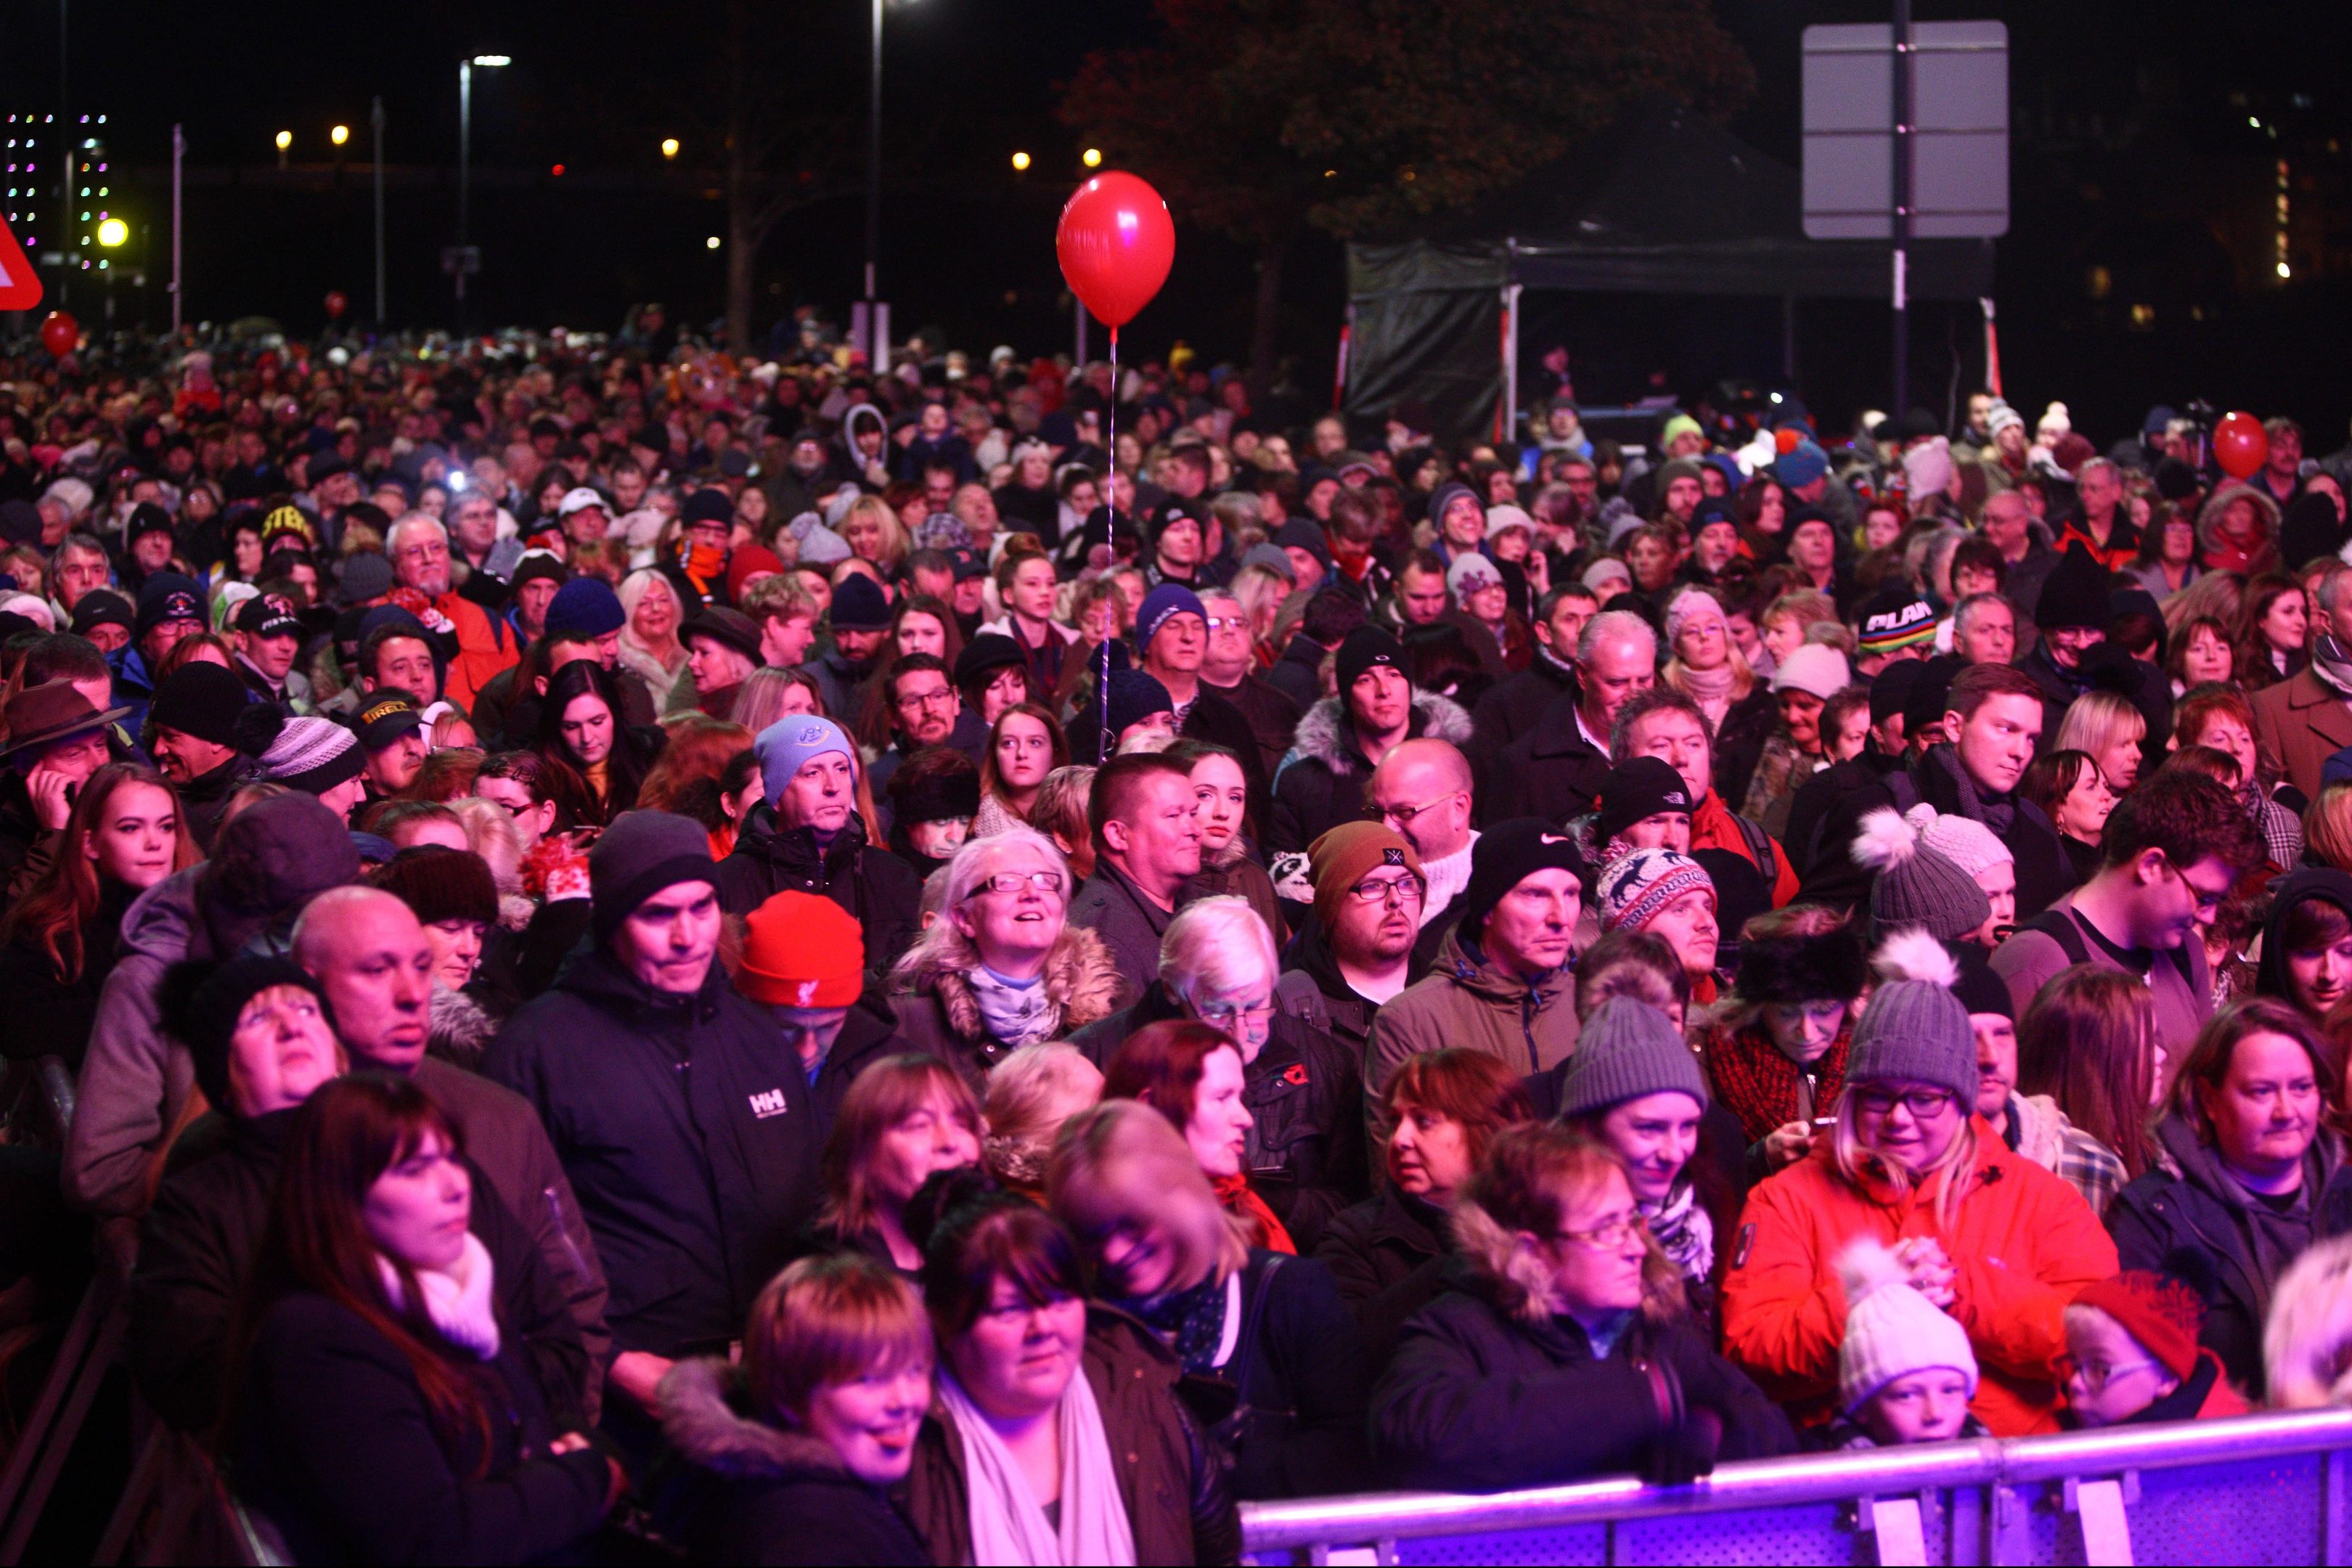 Perth and Kinross Council says the crowds who come to Perth to see the lights switch-on more than justifies the costs of putting on a show,